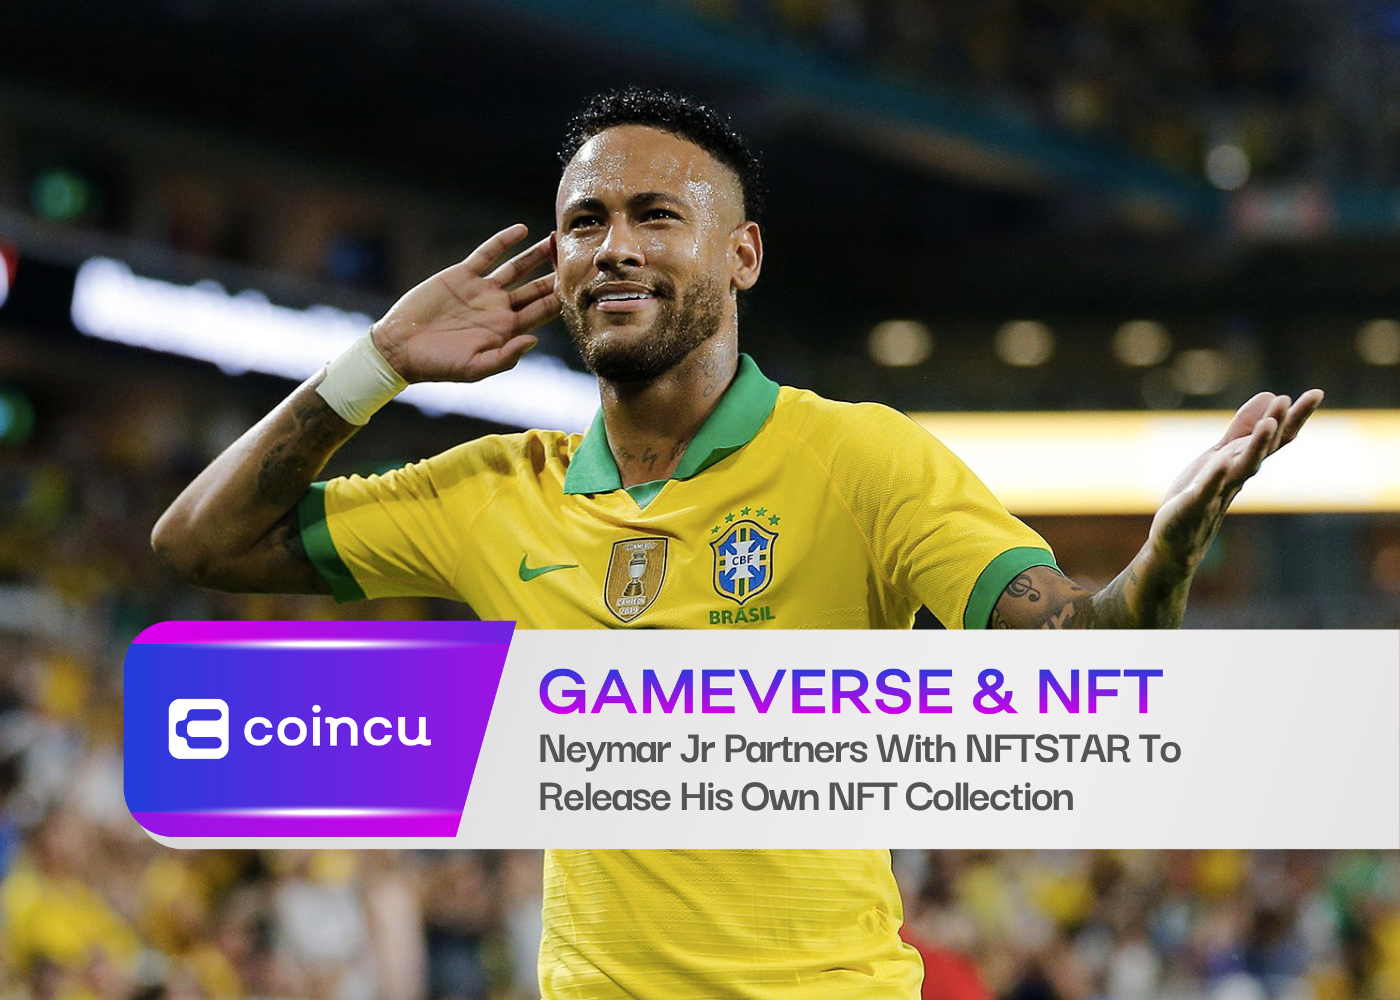 Neymar Jr Partners With NFTSTAR To Release His Own NFT Collection